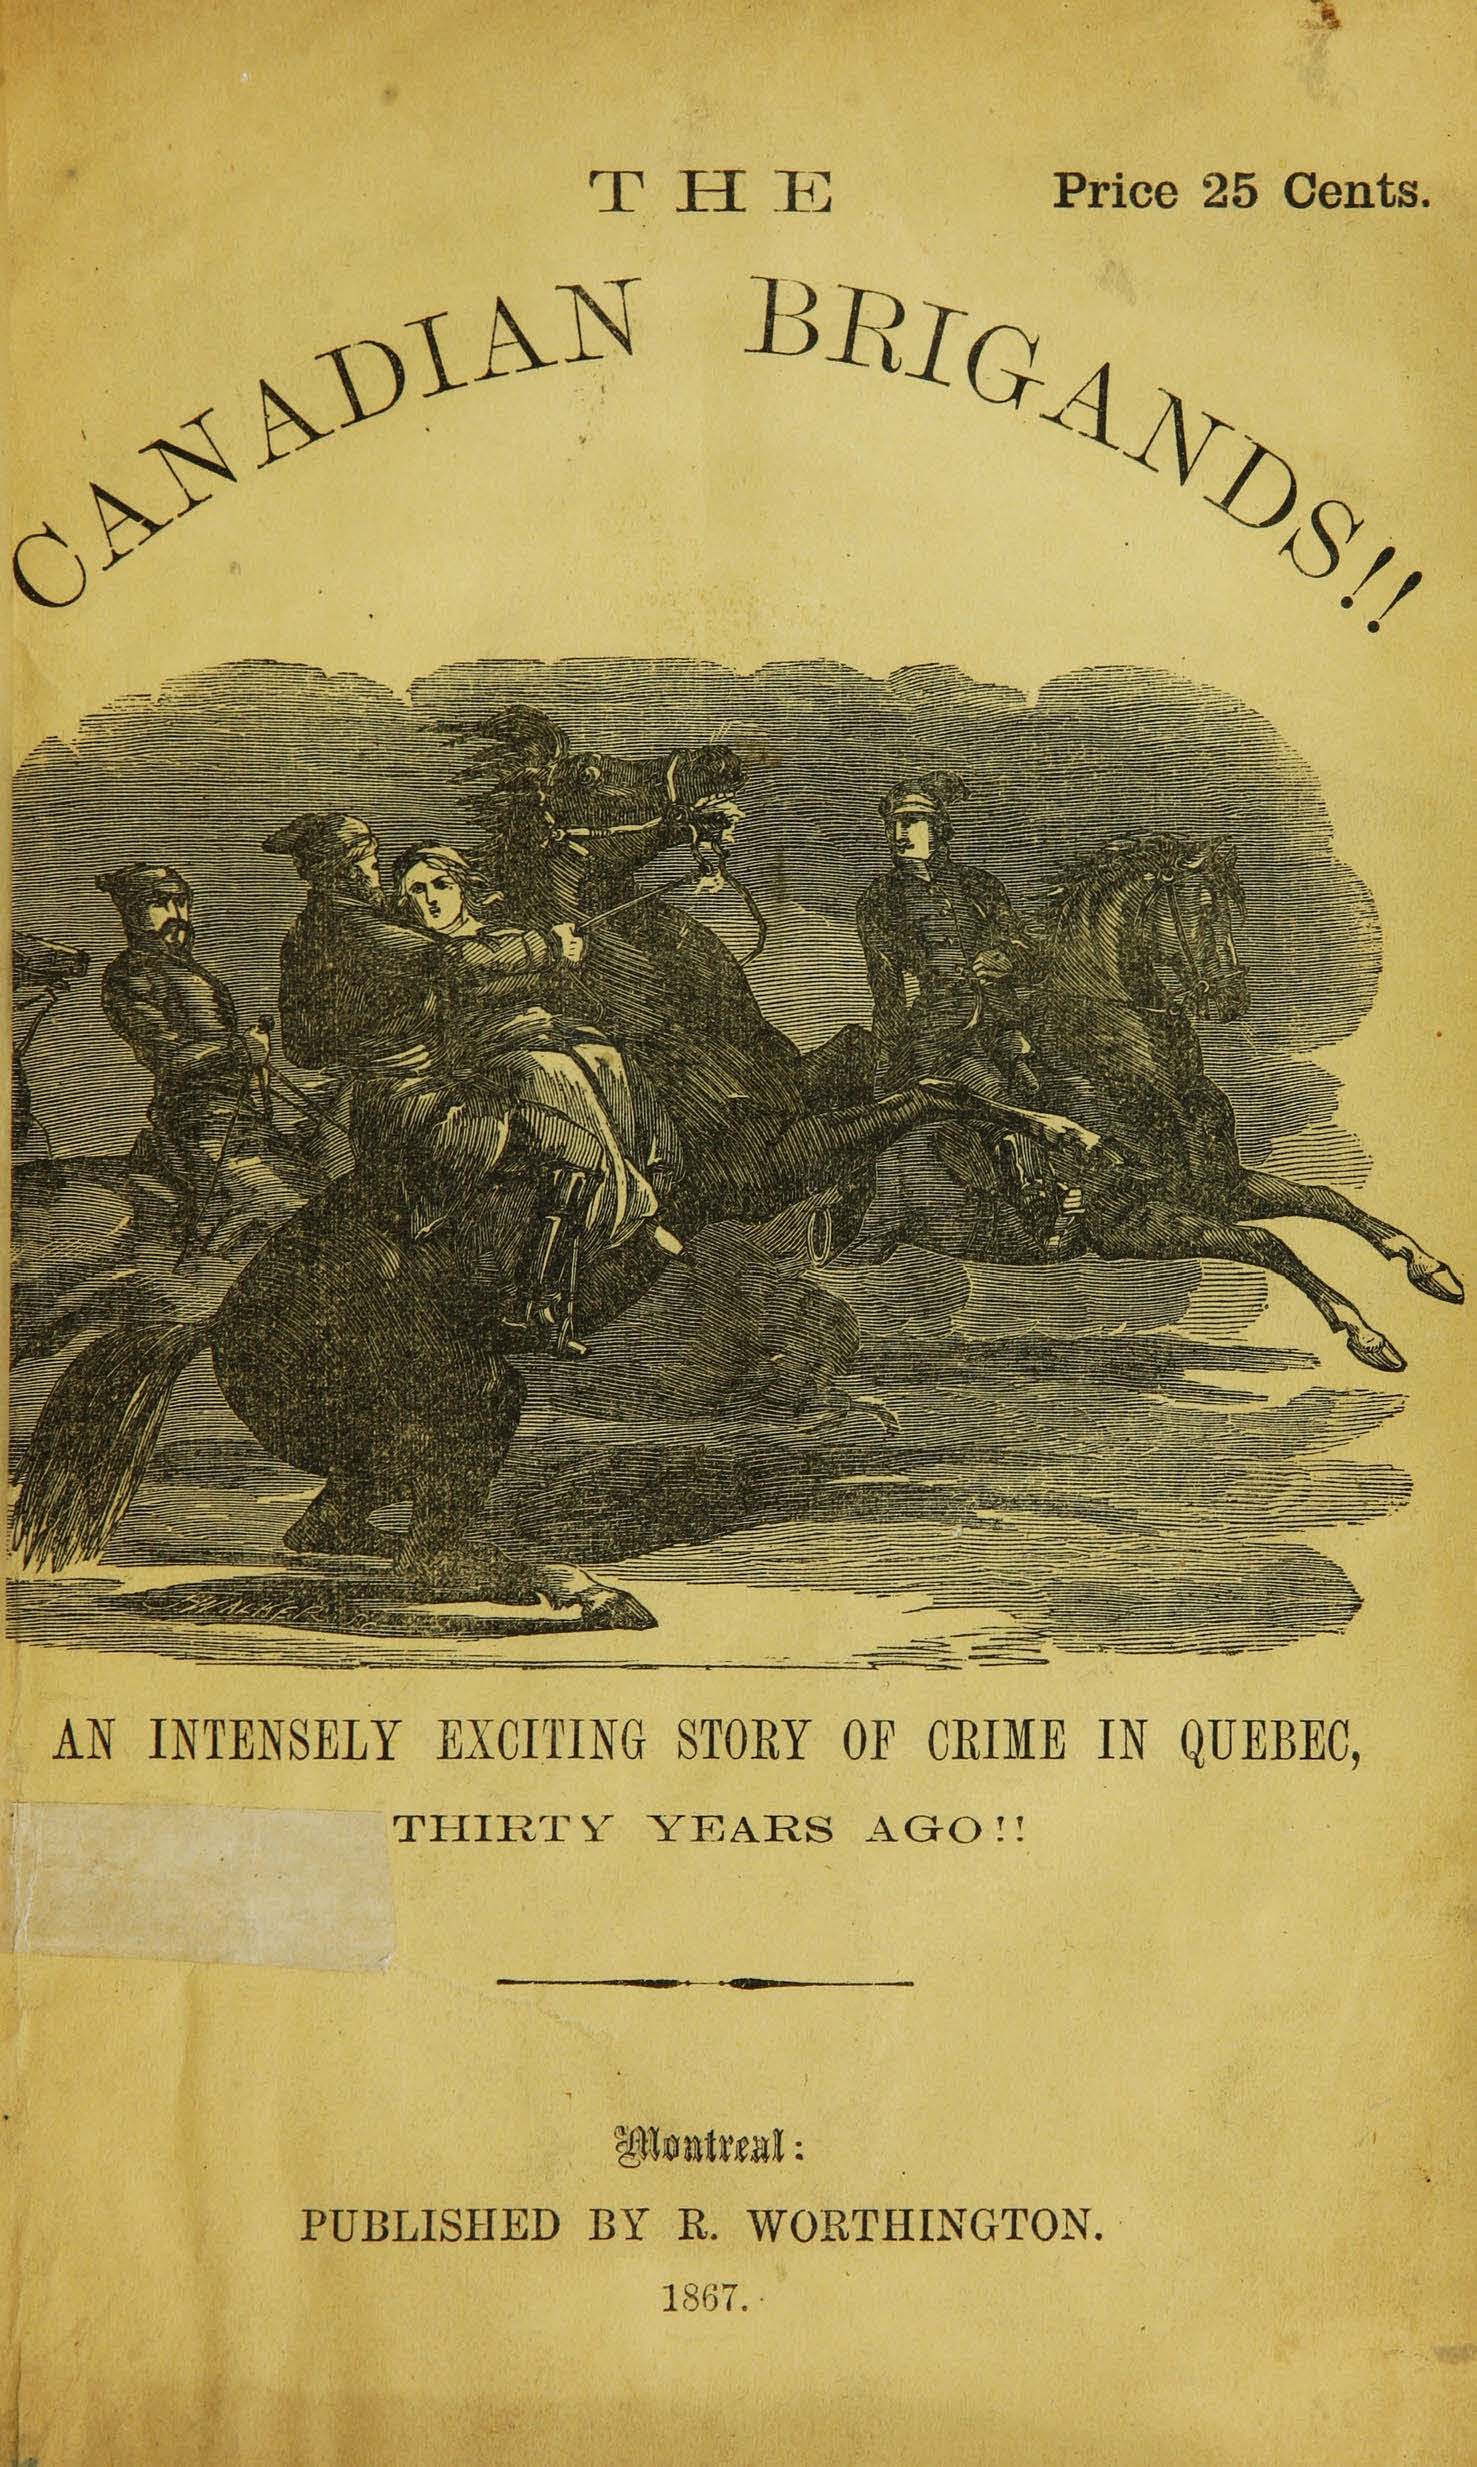 Front piece of The Canadian brigands: An intensely exciting story of crime in Quebec thirty years ago. (1867).